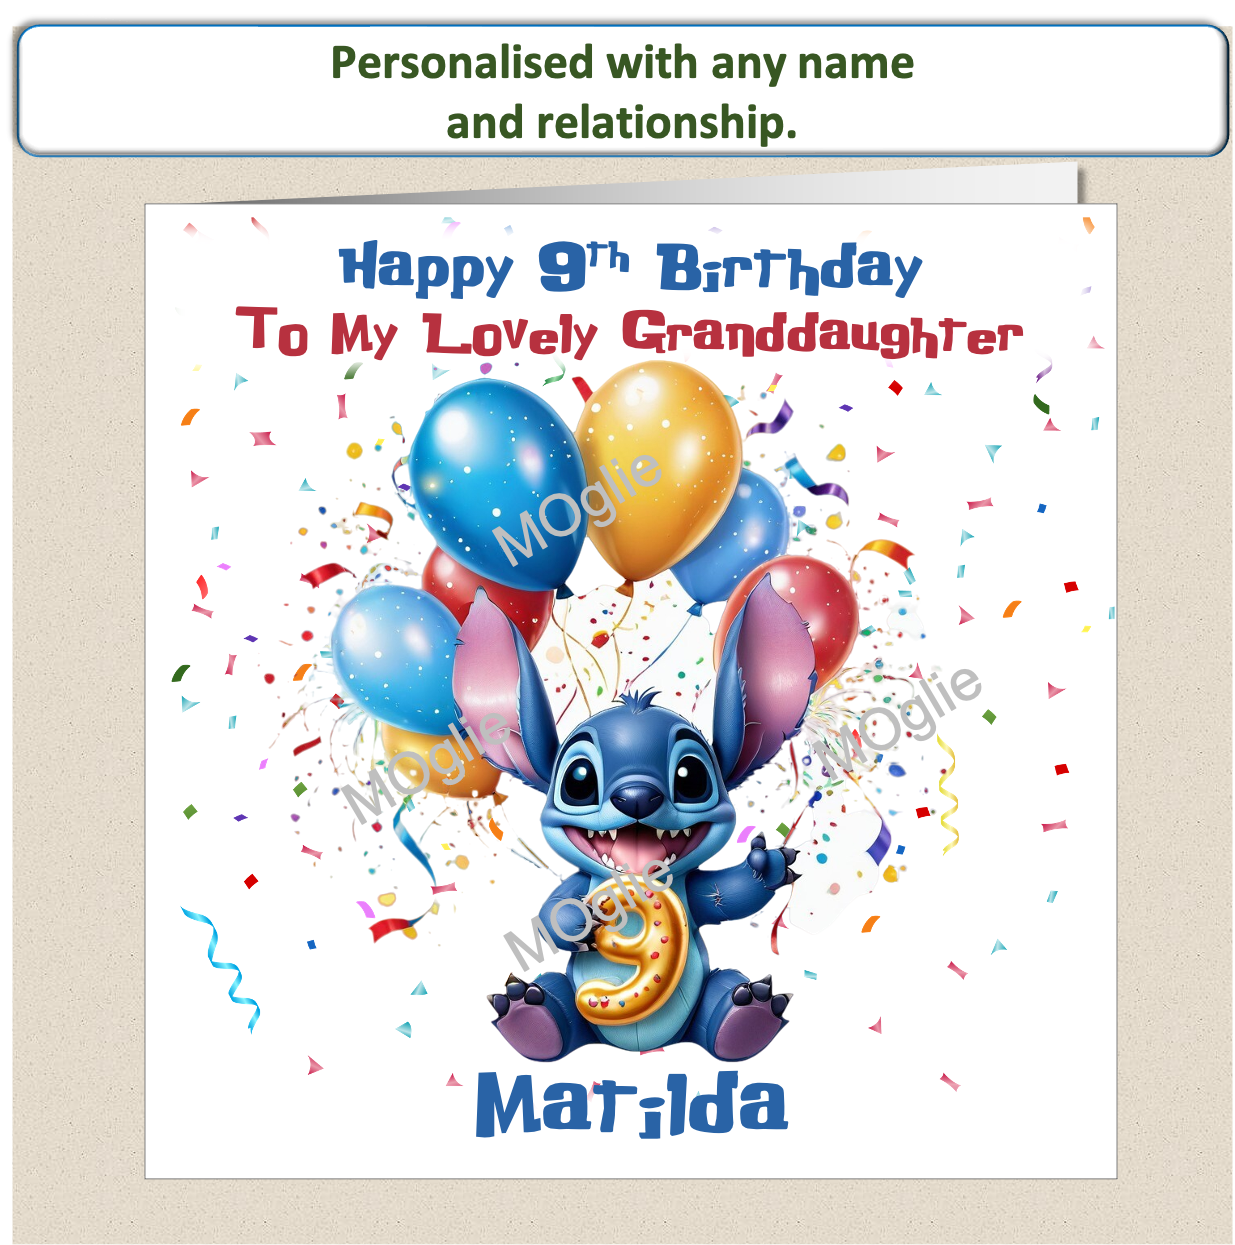 Personalised Lilo and Stitch 9th Birthday Cards with name and relationship